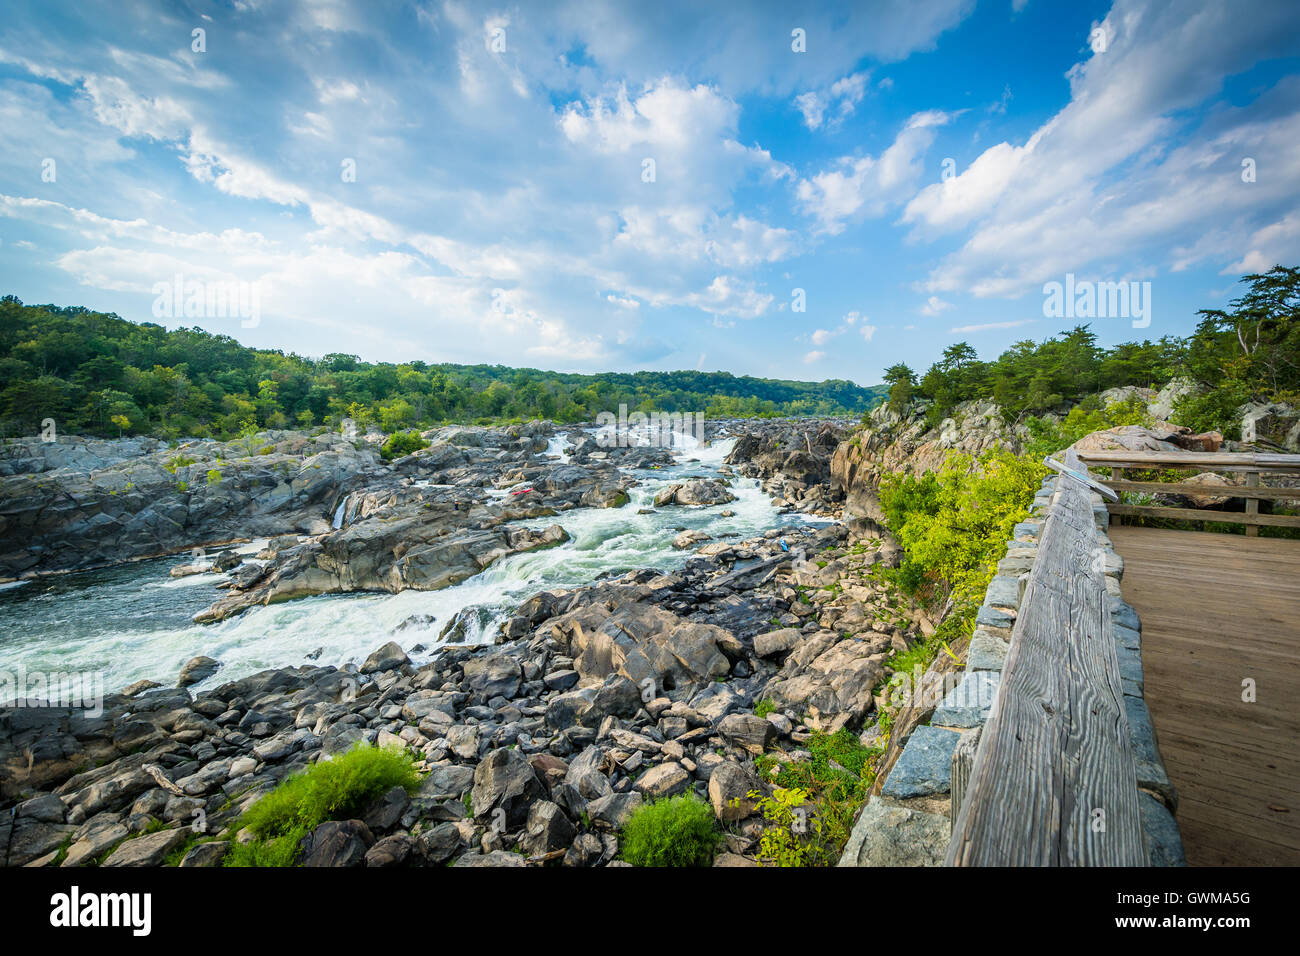 Rapids in the Potomac River at Great Falls, seen from Olmsted Island at Chesapeake & Ohio Canal National Historical Park, Maryla Stock Photo